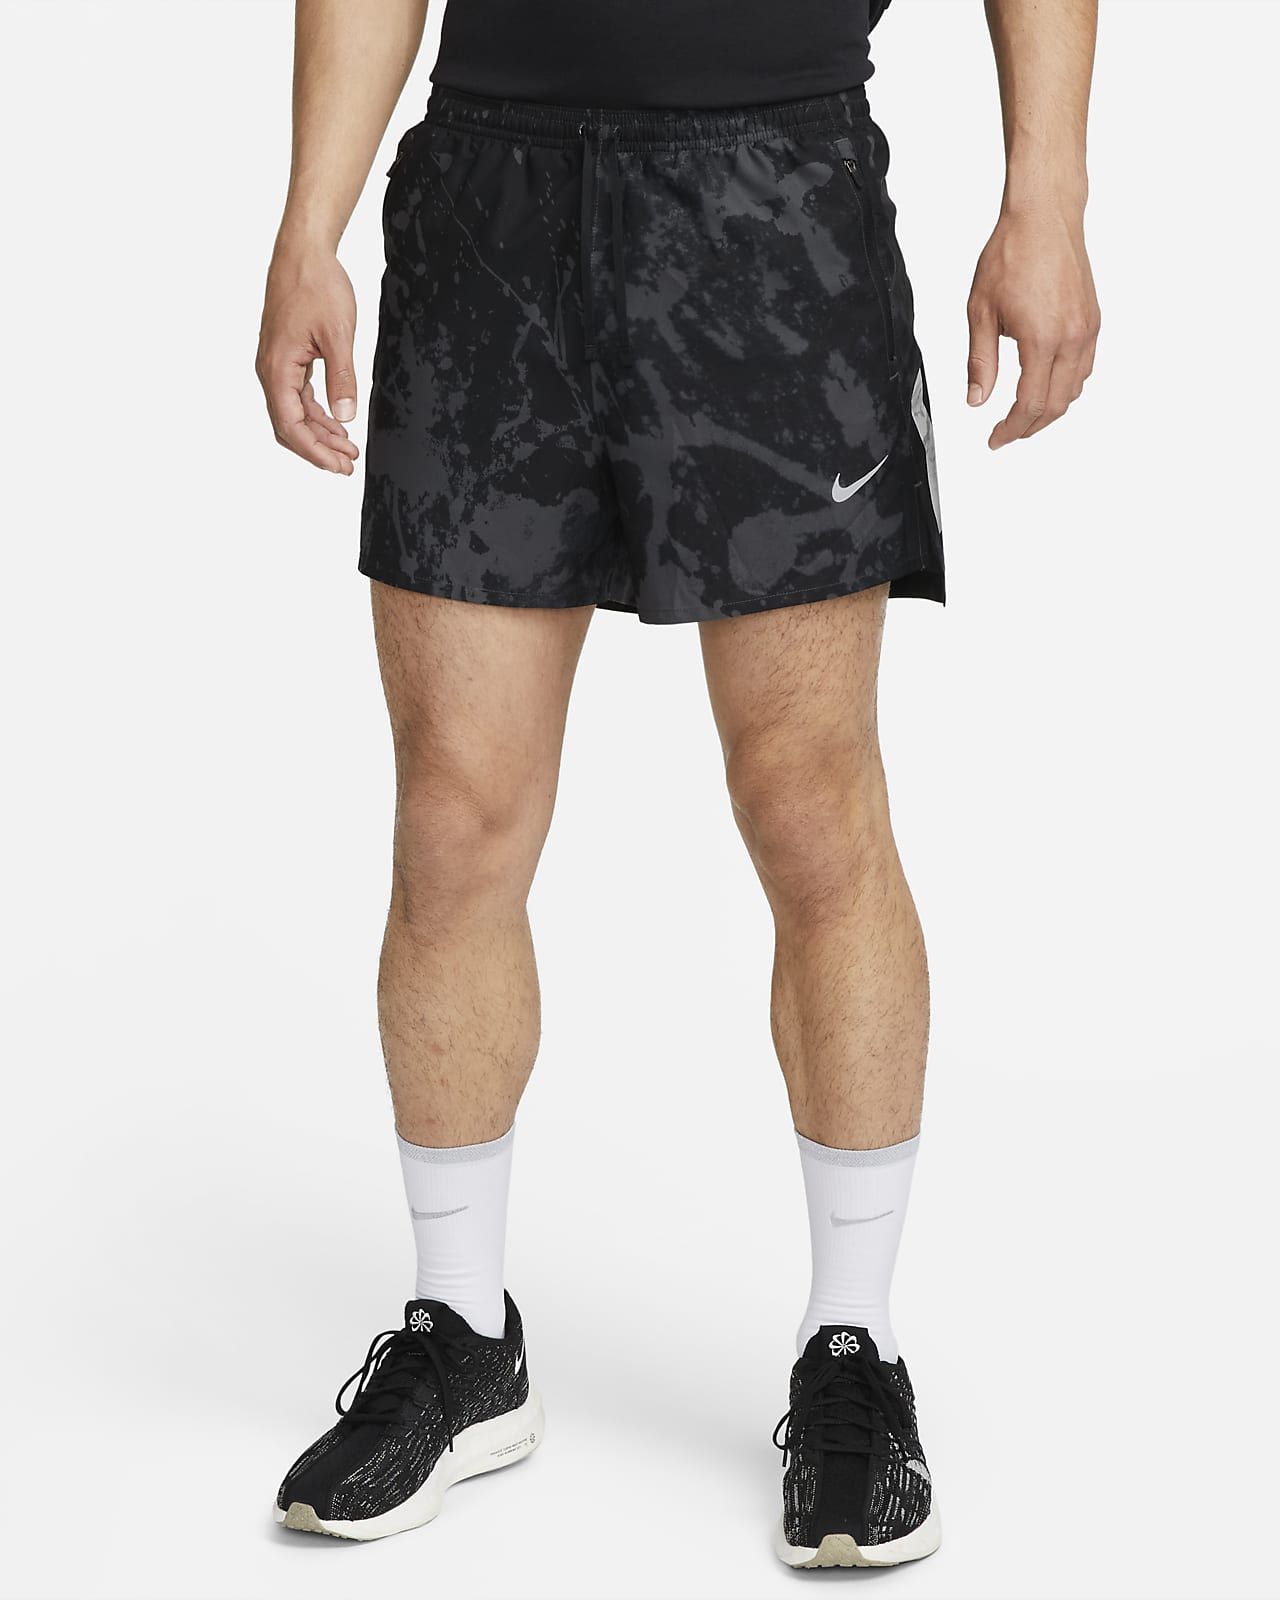 Nike Dri-FIT Run Division Stride Men's 4" Brief-Lined Running Shorts